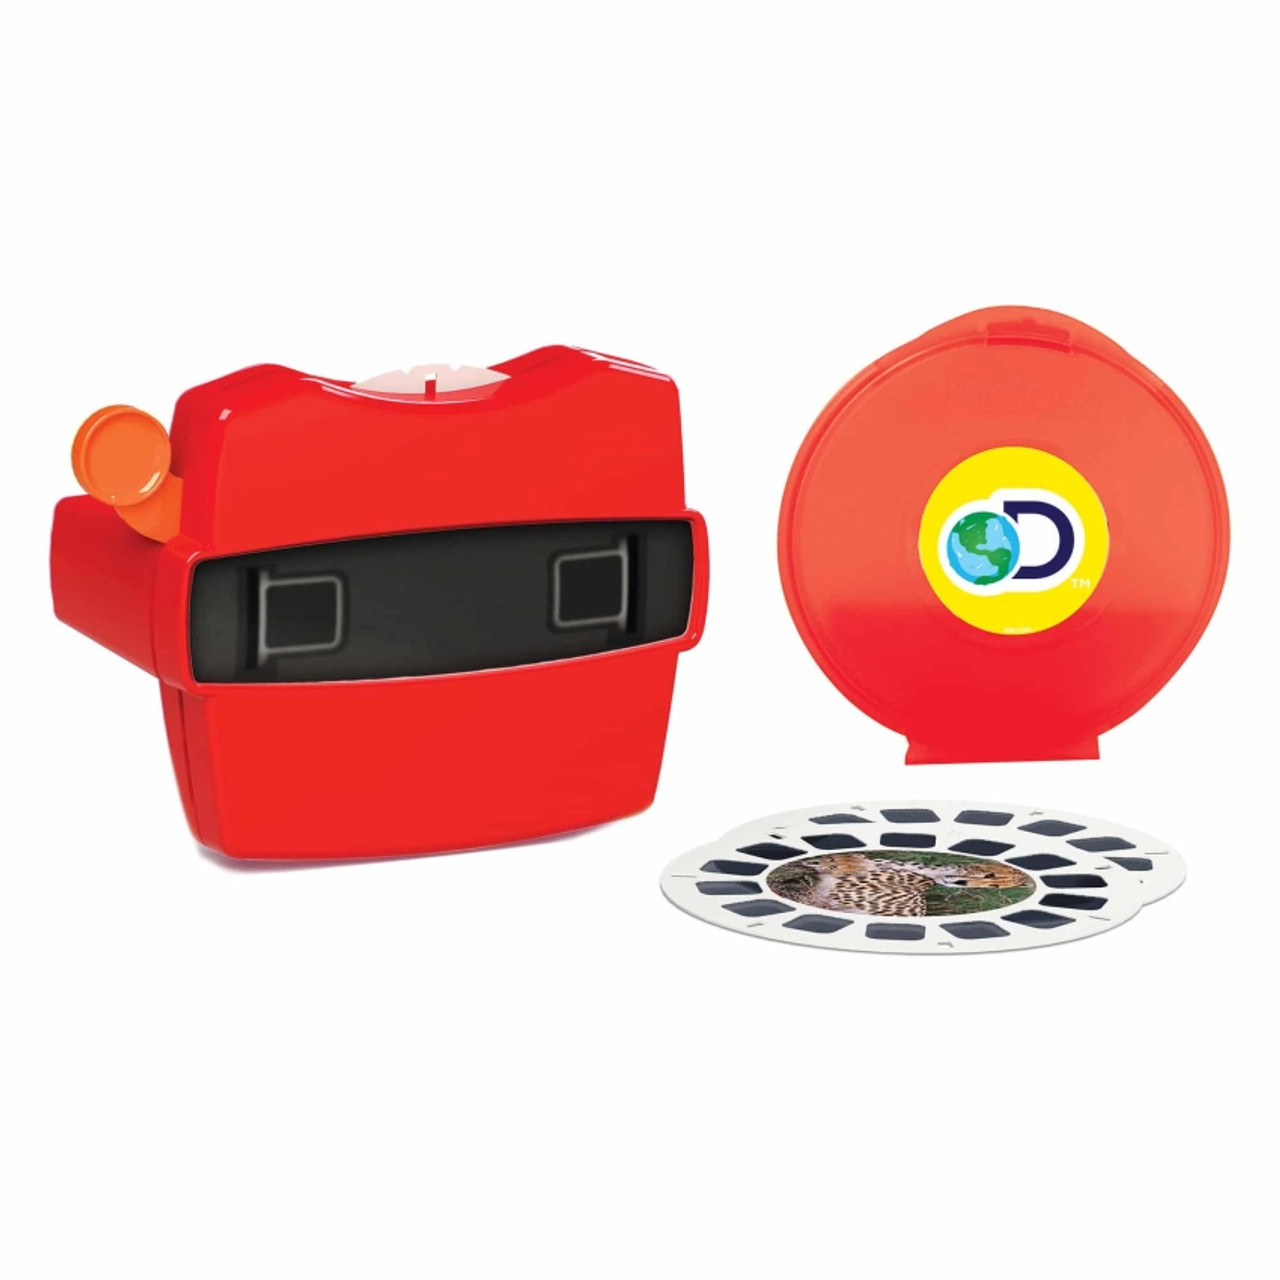 Mayko Butterfly Reels for Viewfinder. Compatible with Viewmaster Viewers. Set of 3 (Reels Only)